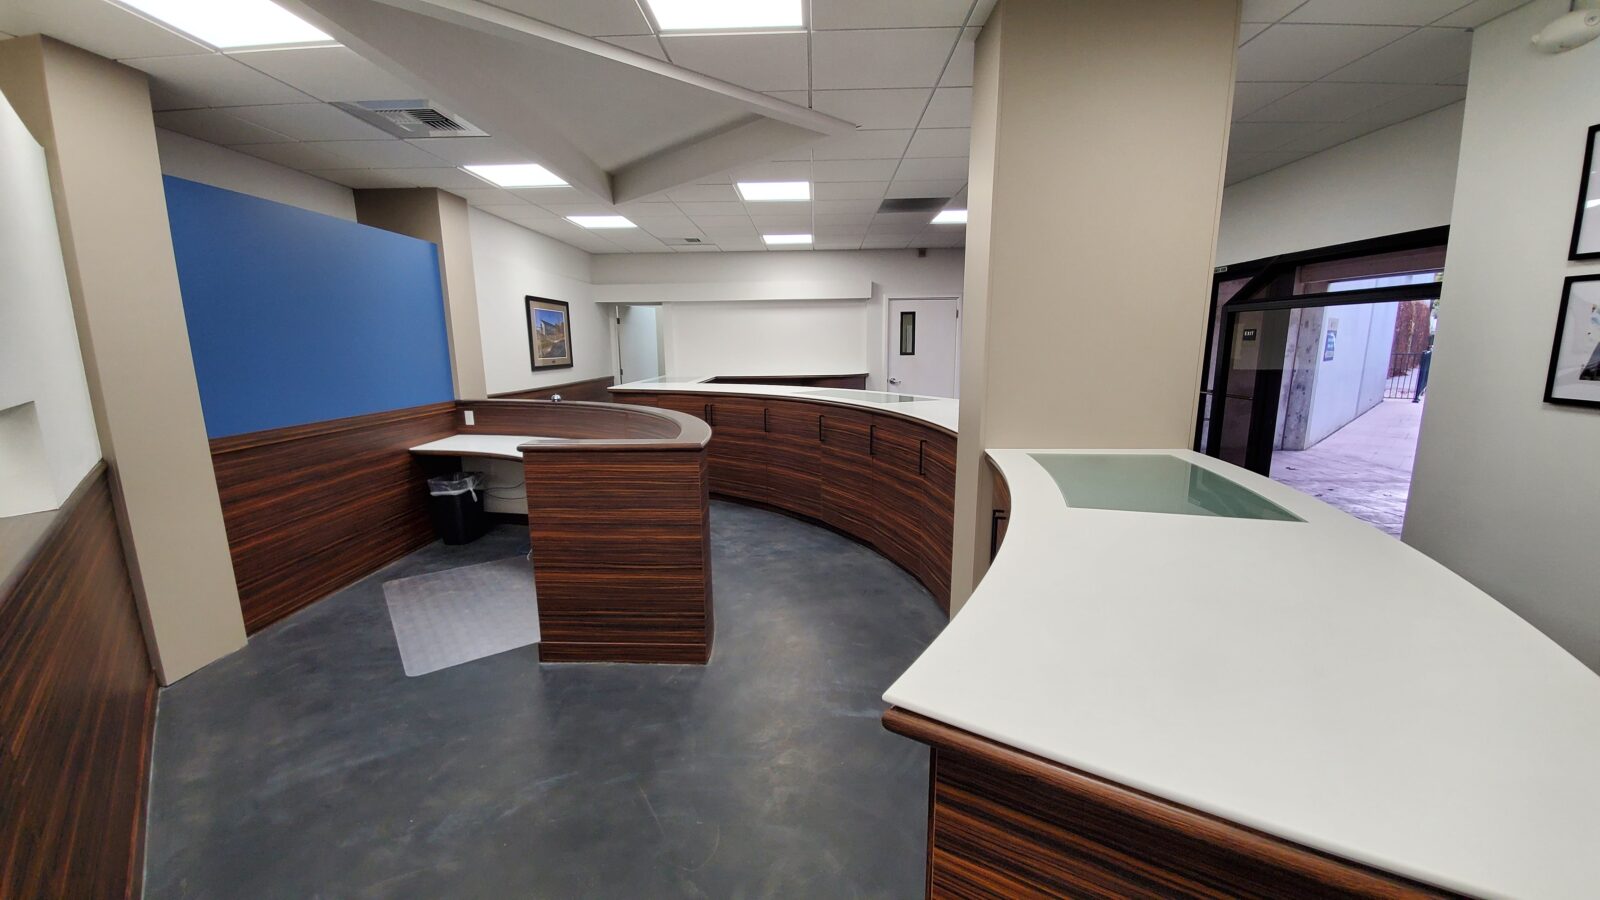 Modern reception area counter top. Commercial counter top office space. Corian counter top solid surface.